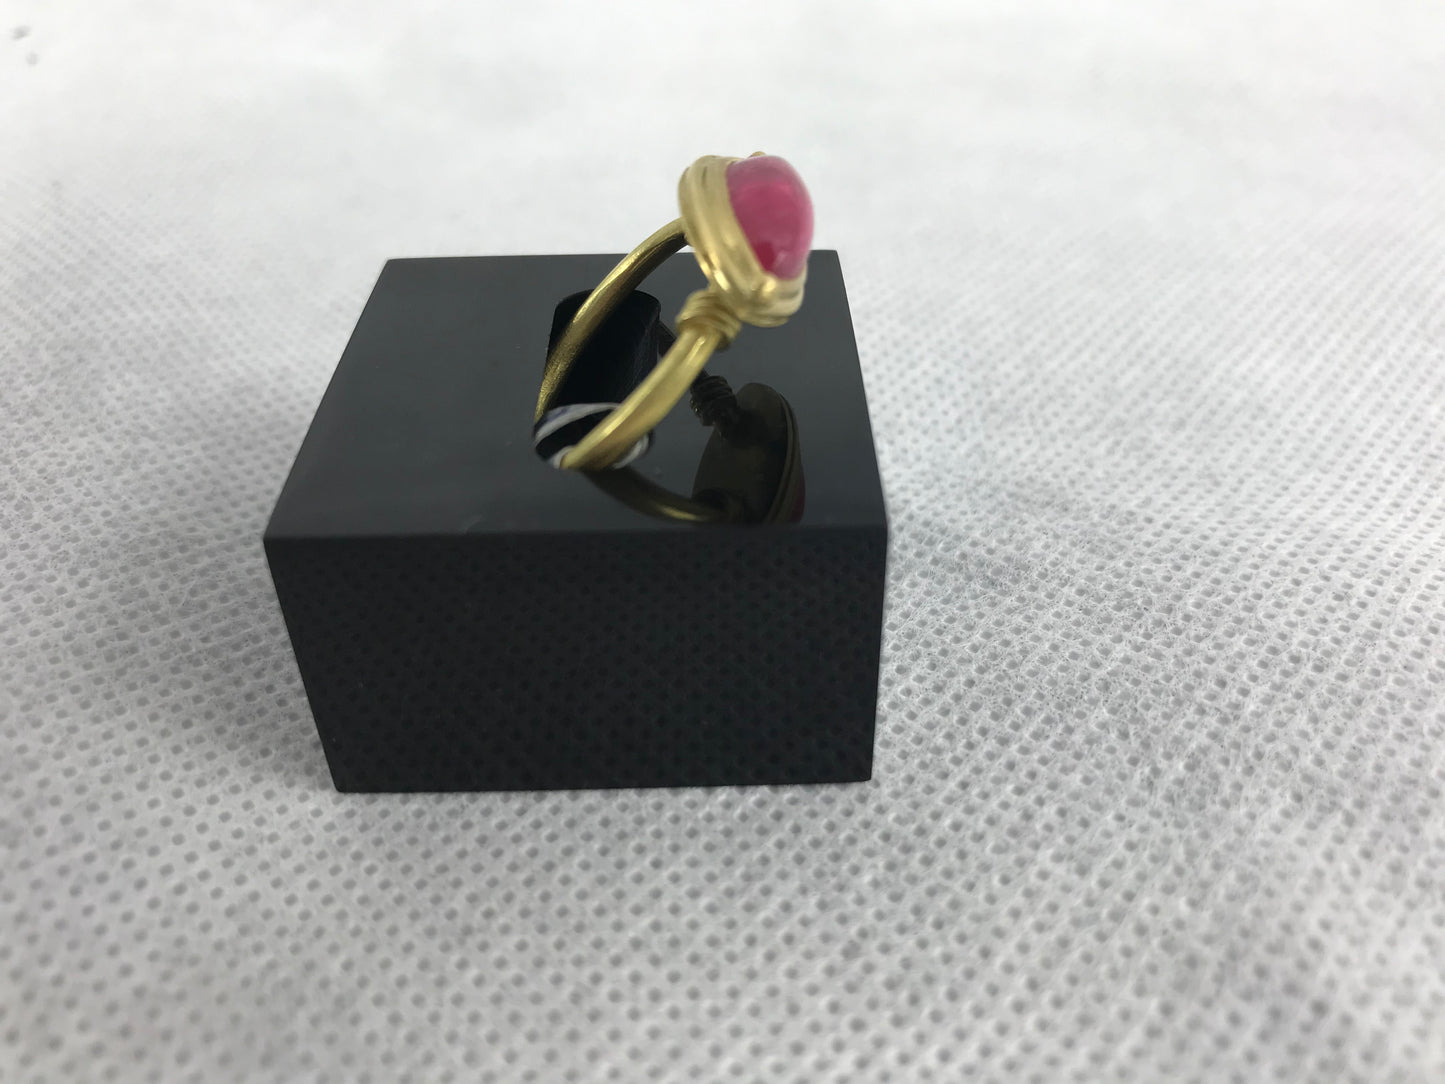 Scott-Moncrieff, Jean: Gold and pink tourmaline ring